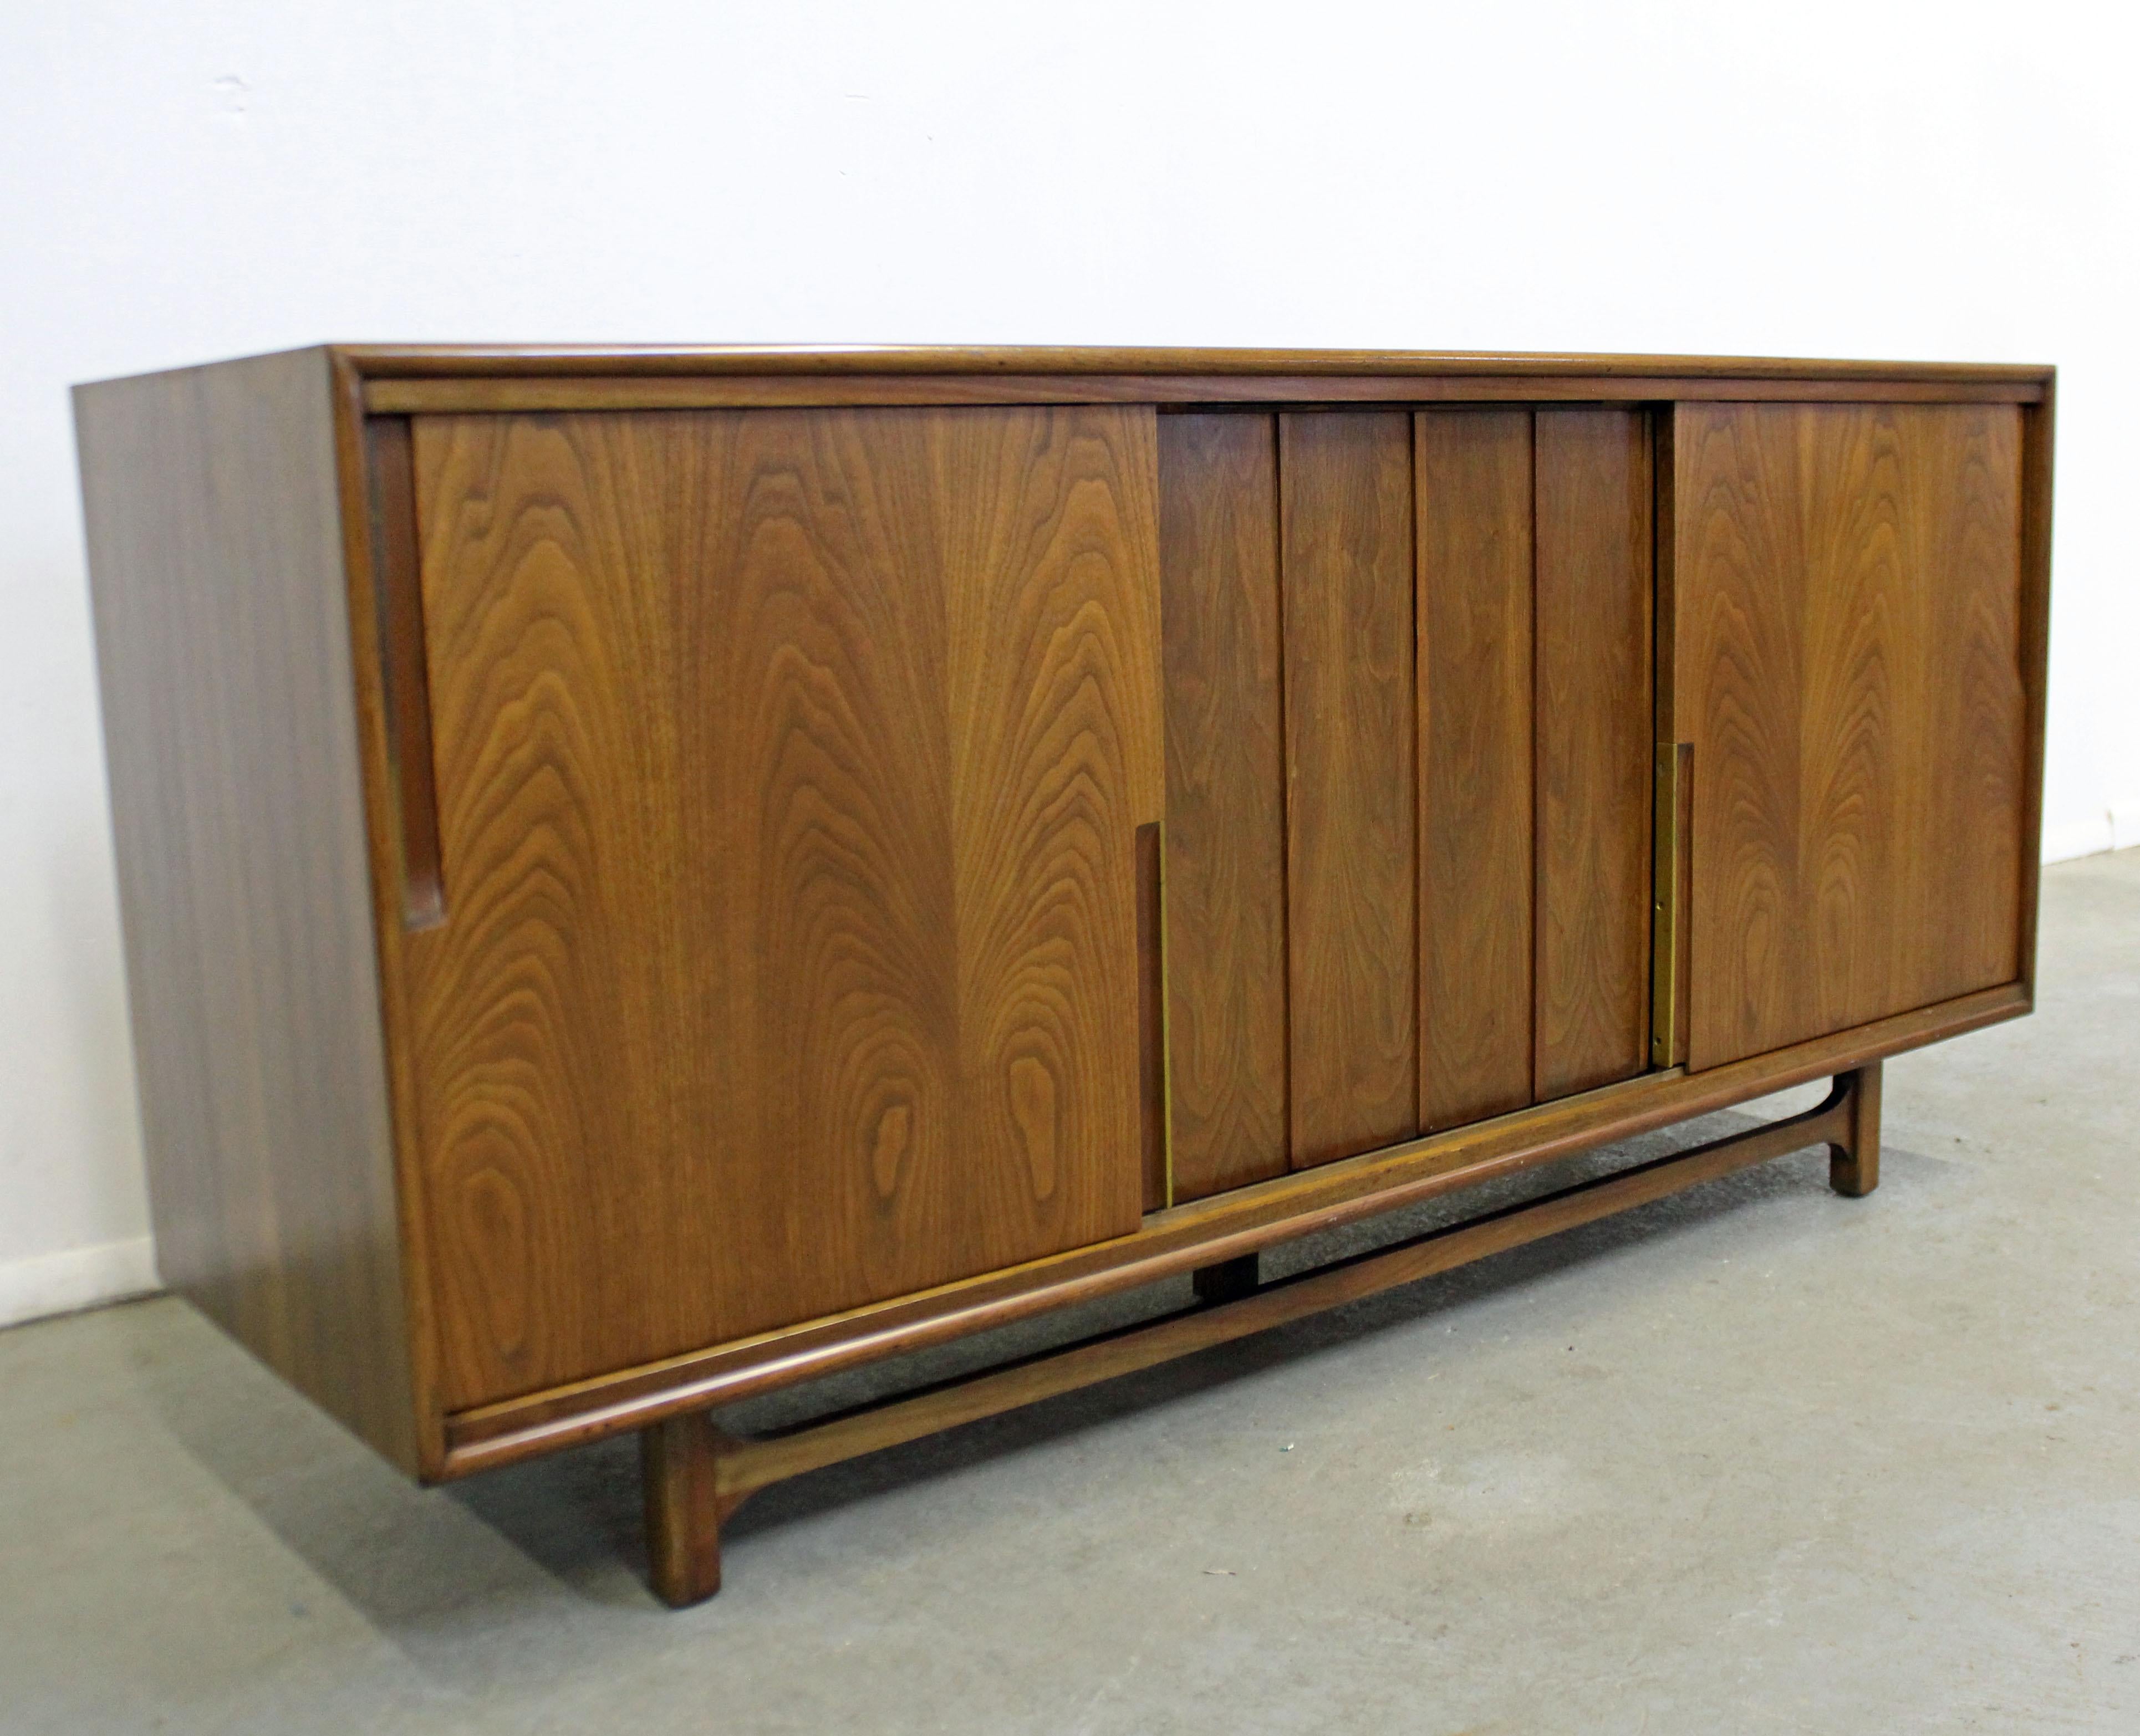 Offered is a vintage Mid-Century Modern walnut credenza by Cavalier. Features three sliding doors with storage inside: four drawers on the left, two drawers and a pull-out shelf in the middle and adjustable shelving on the right. The top left drawer